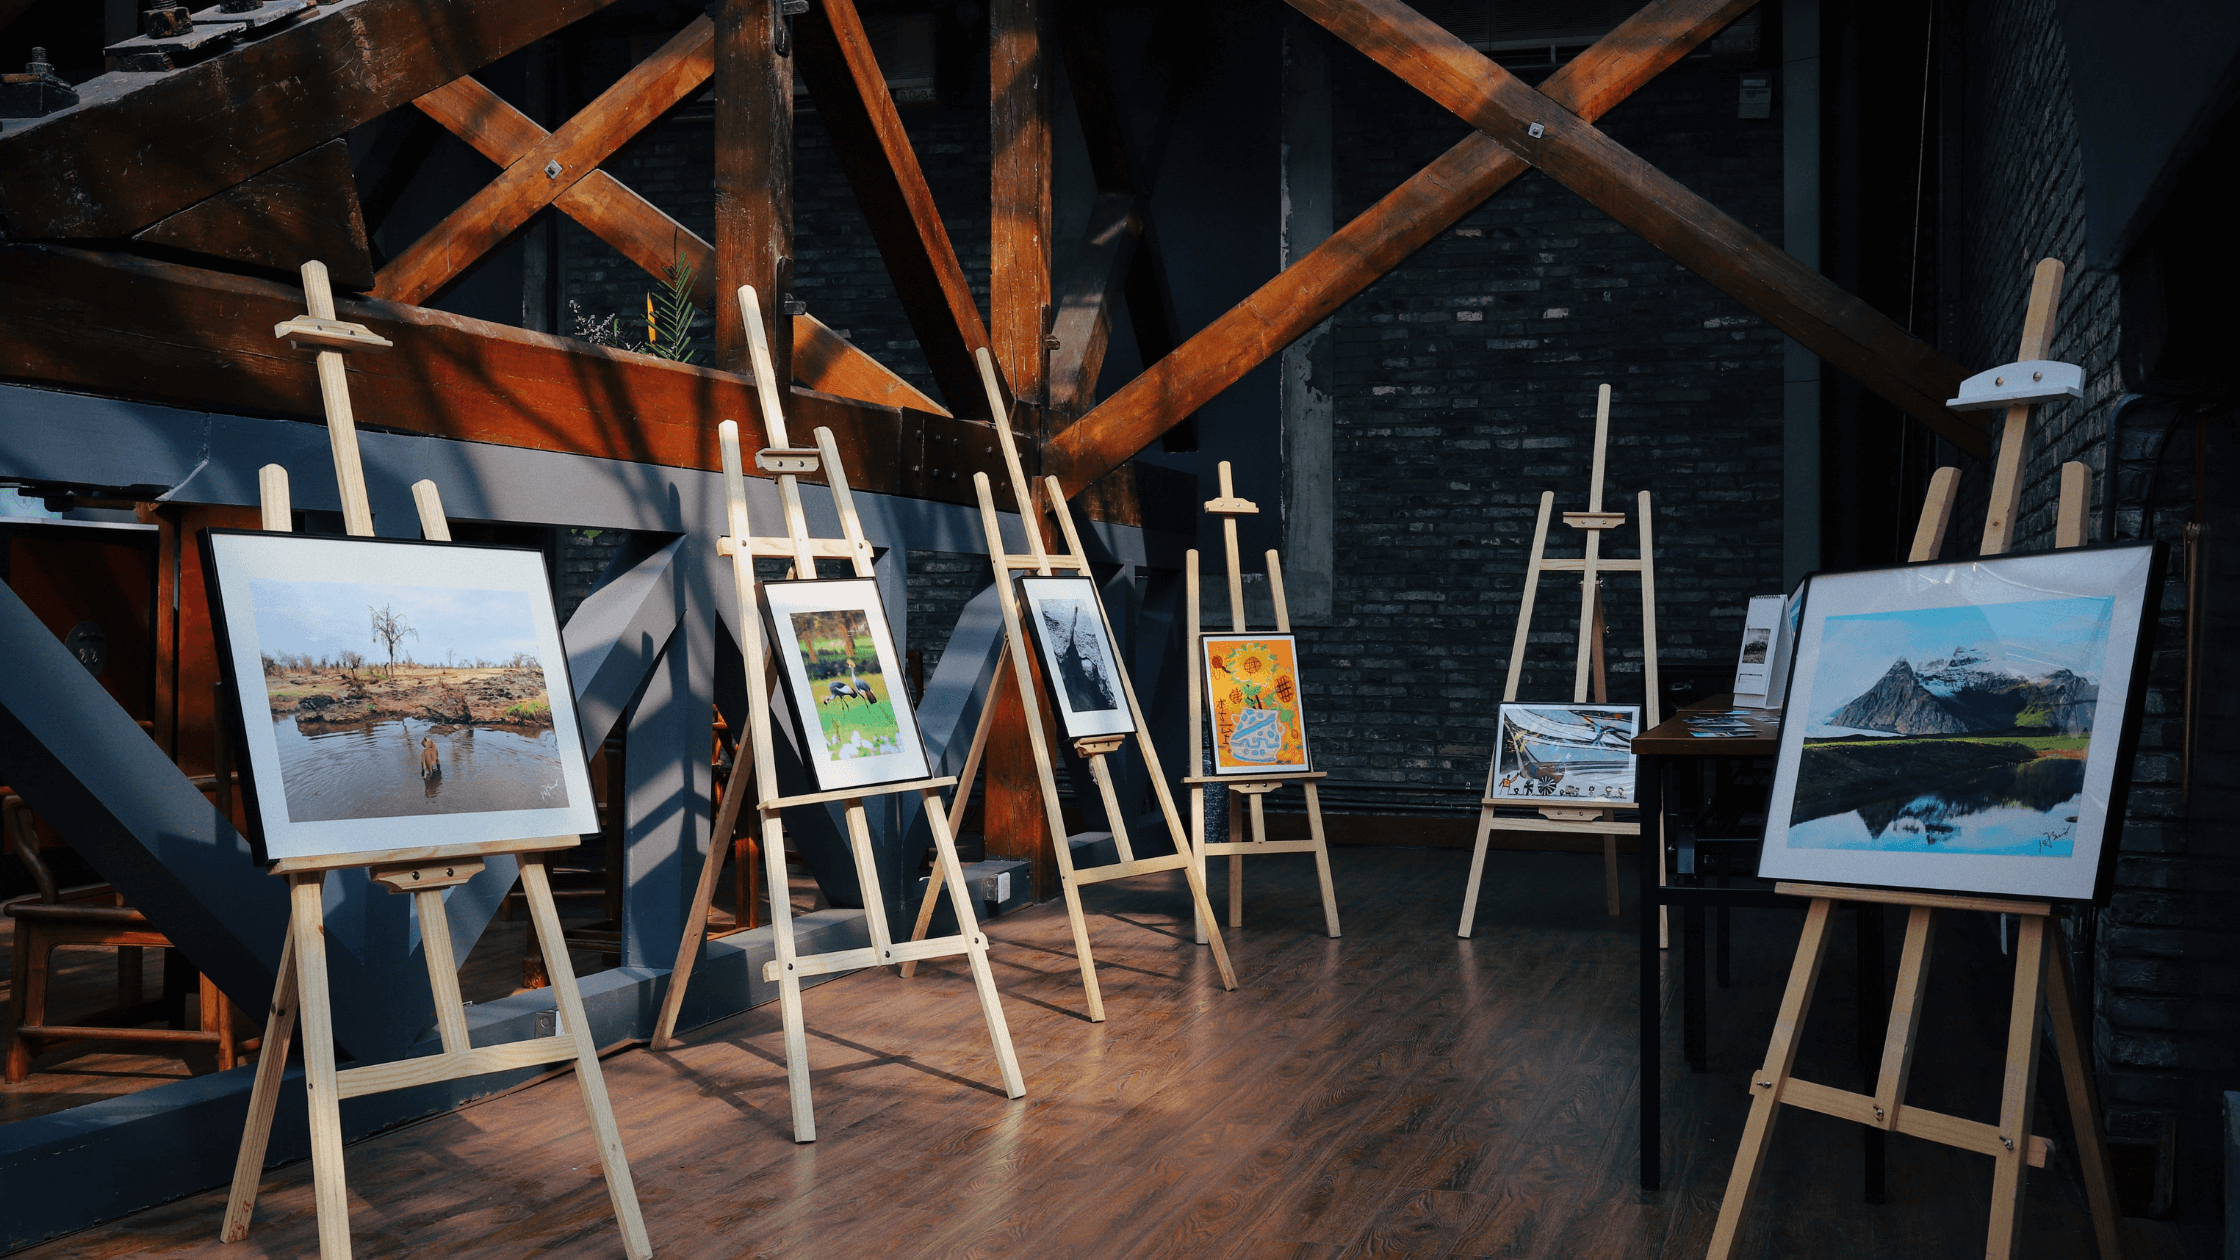 Easels with paintings set up around a rustic gallery room